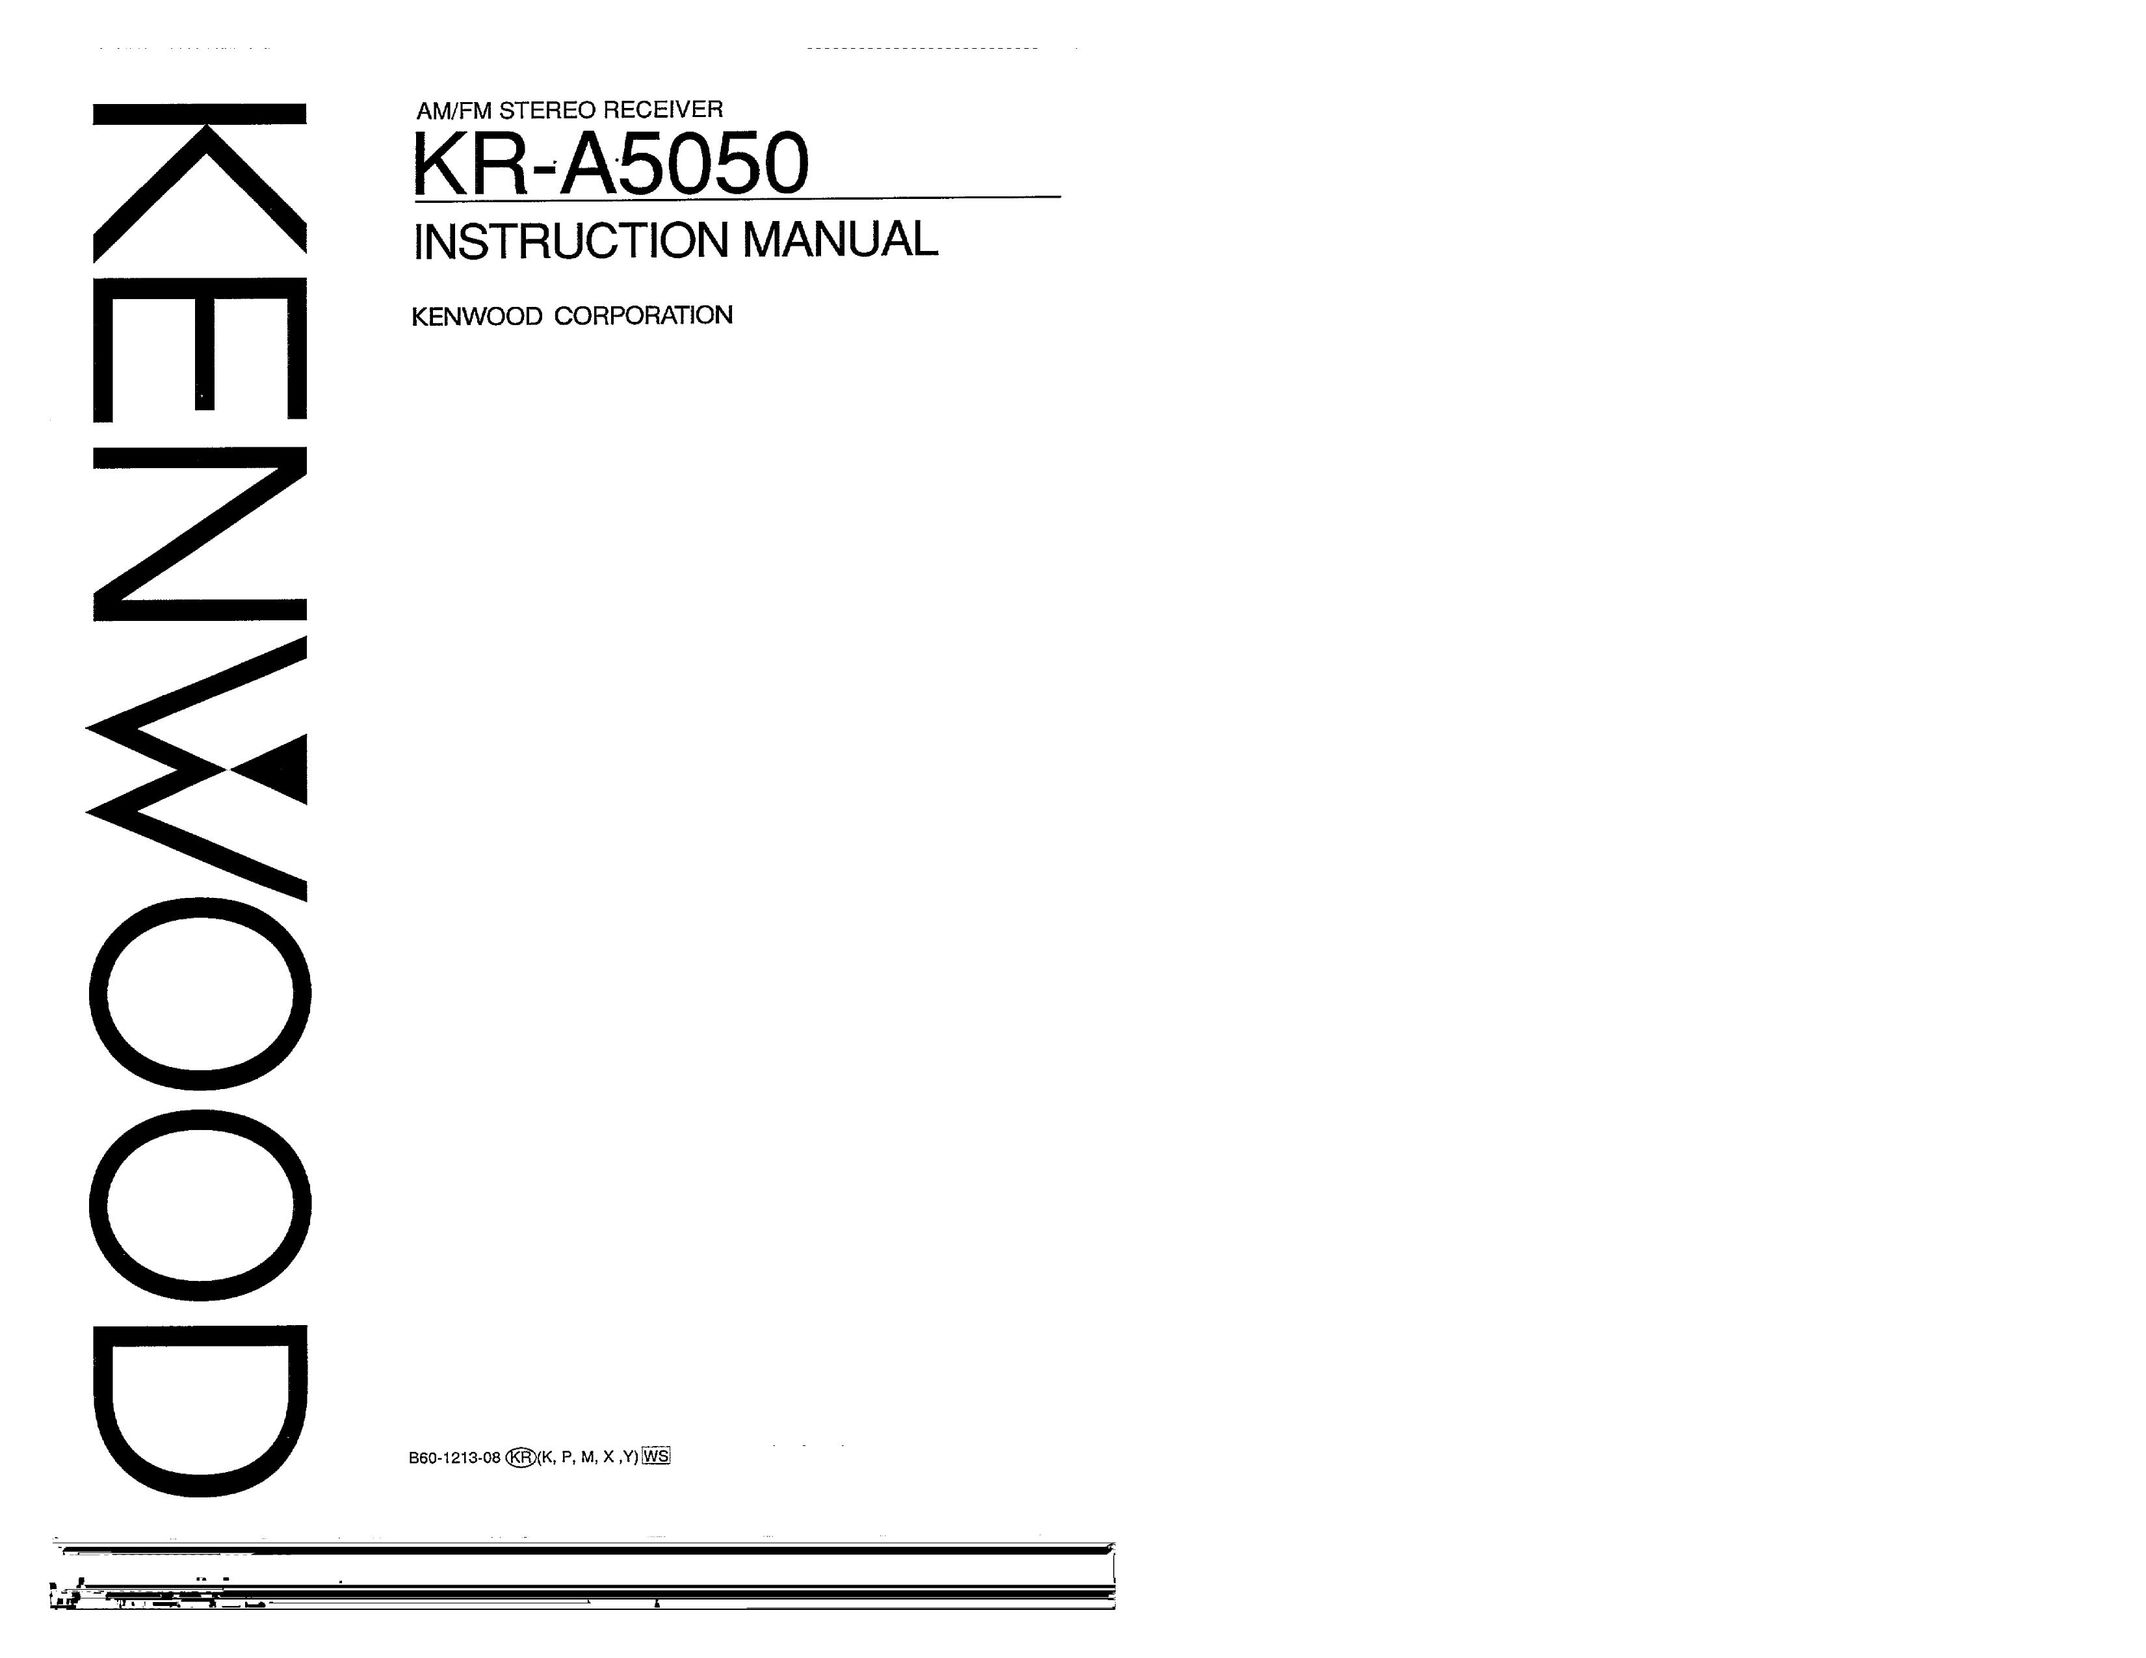 Kenwood KR-A5050 Stereo Receiver User Manual